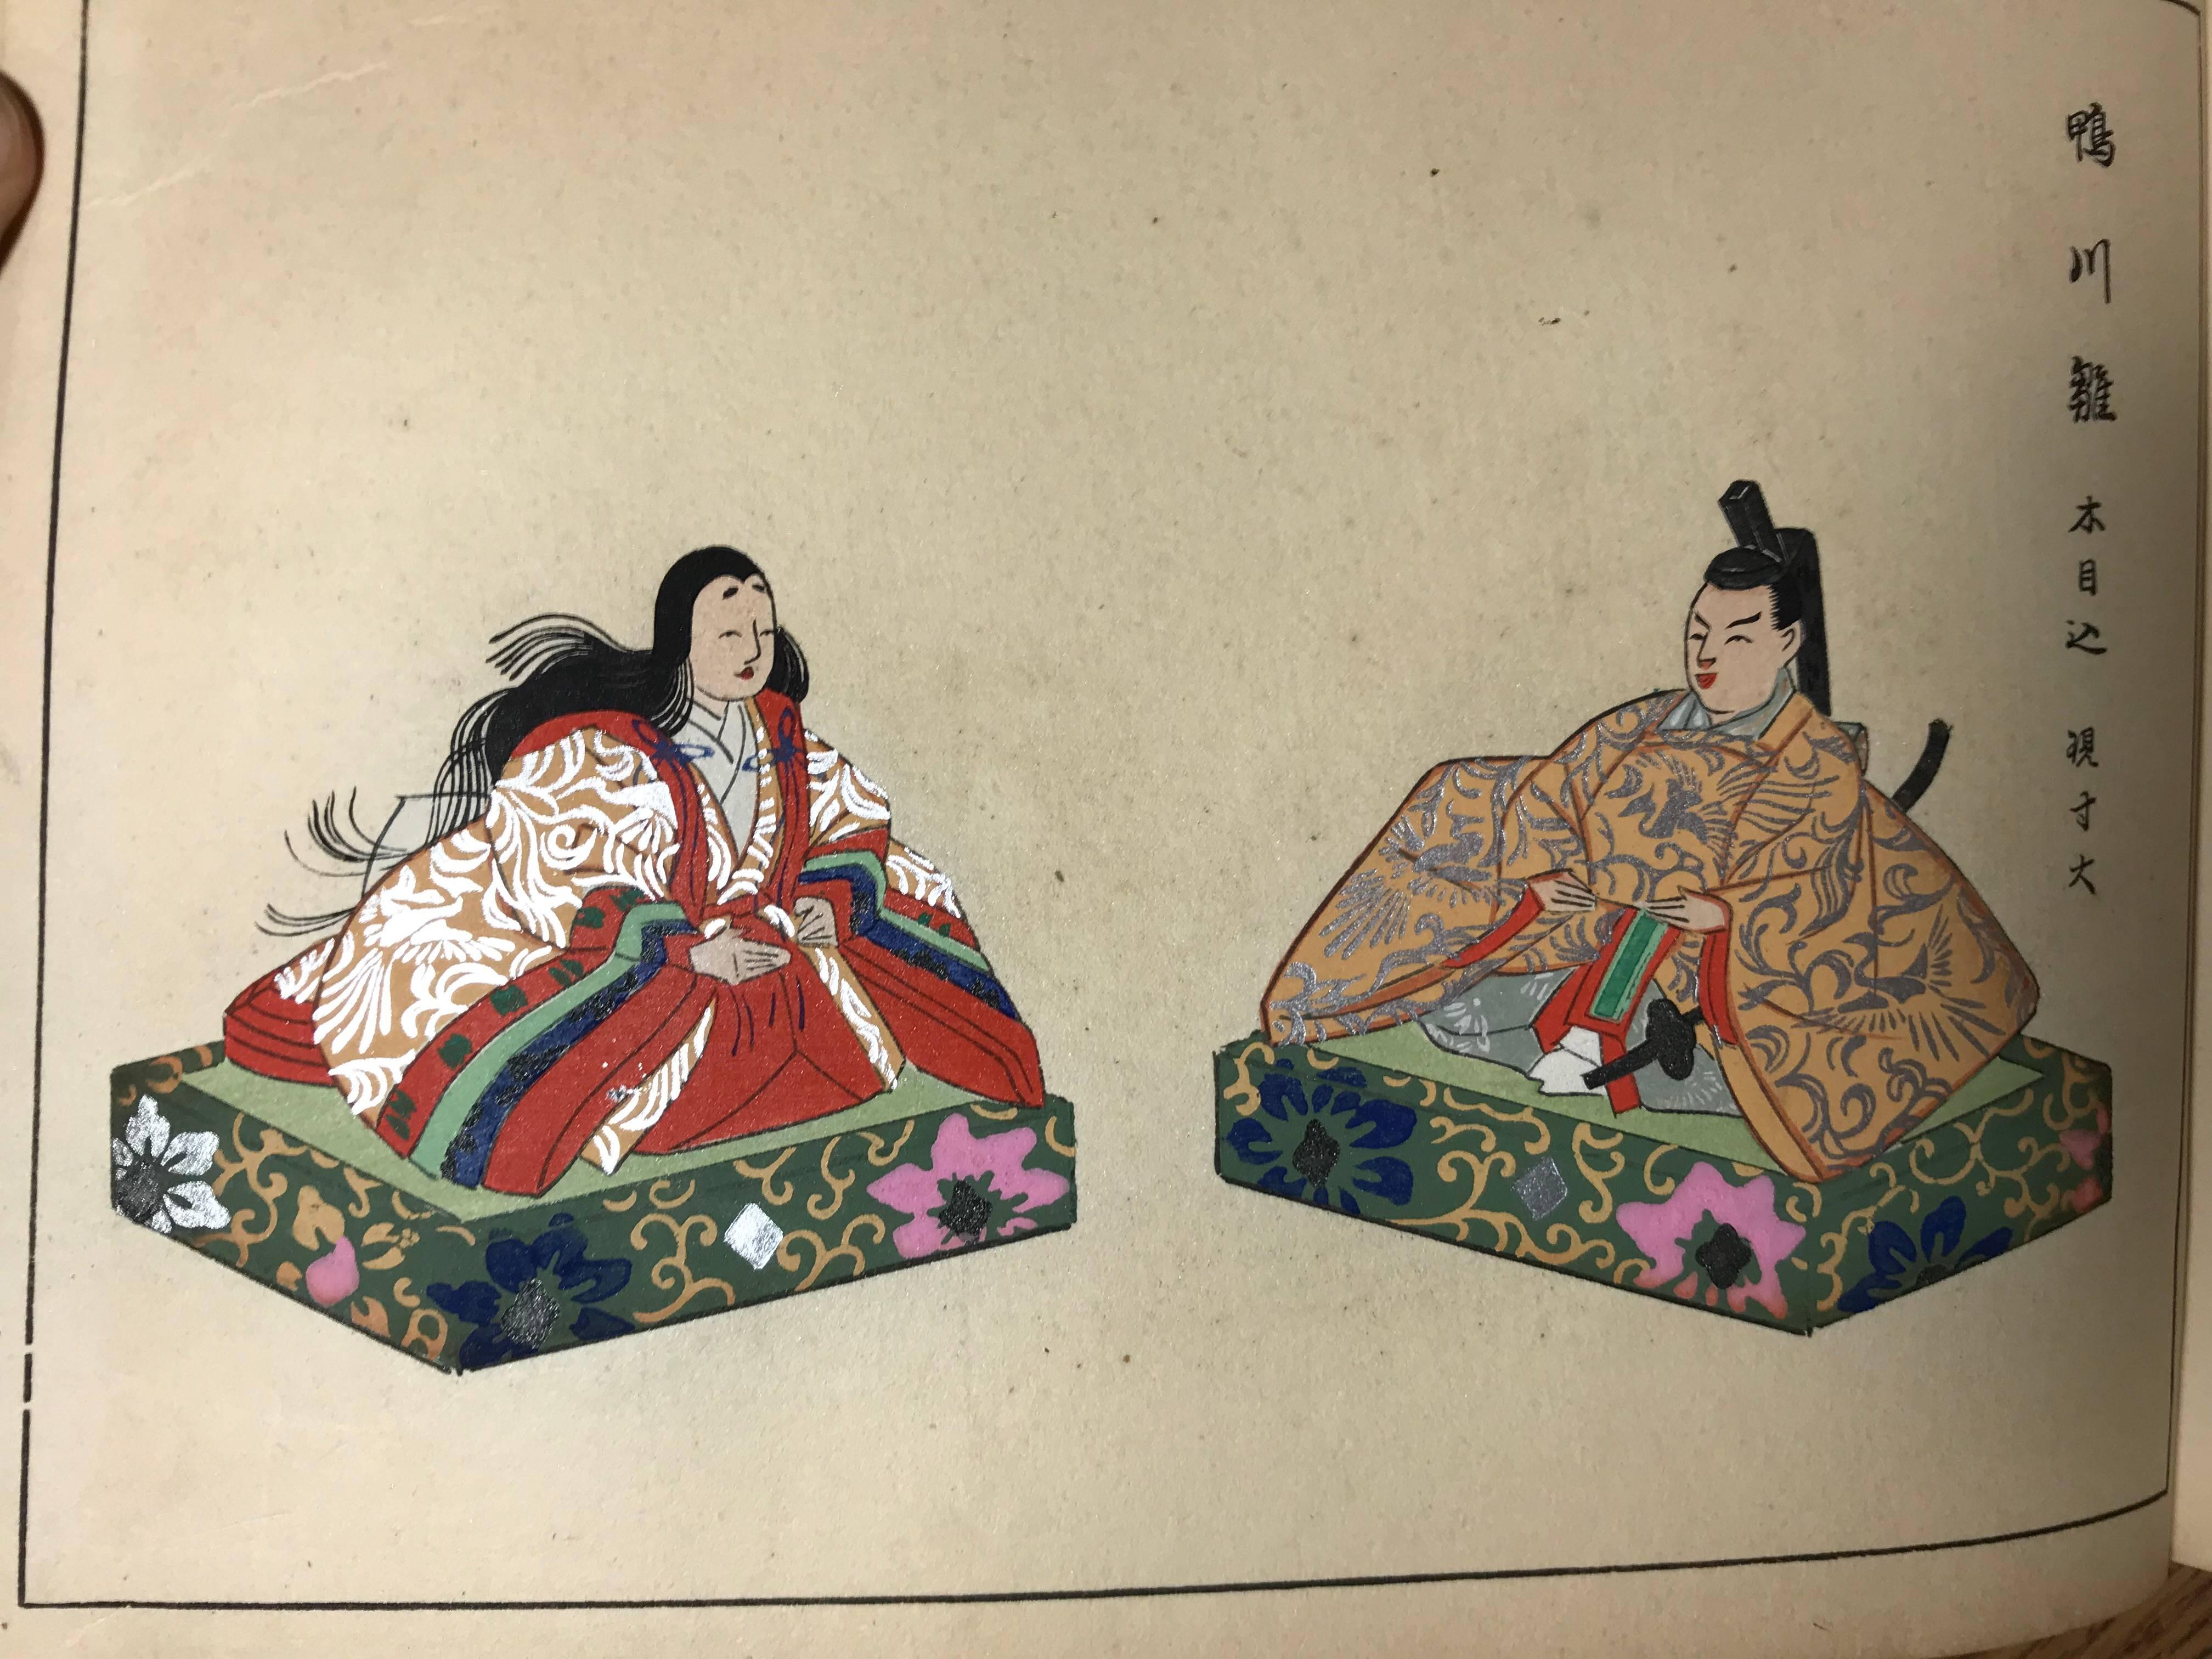 Hand-Crafted Japan Color Fashion Woodblock Prints Album,  42 Prints -Frame able-  early 20thc